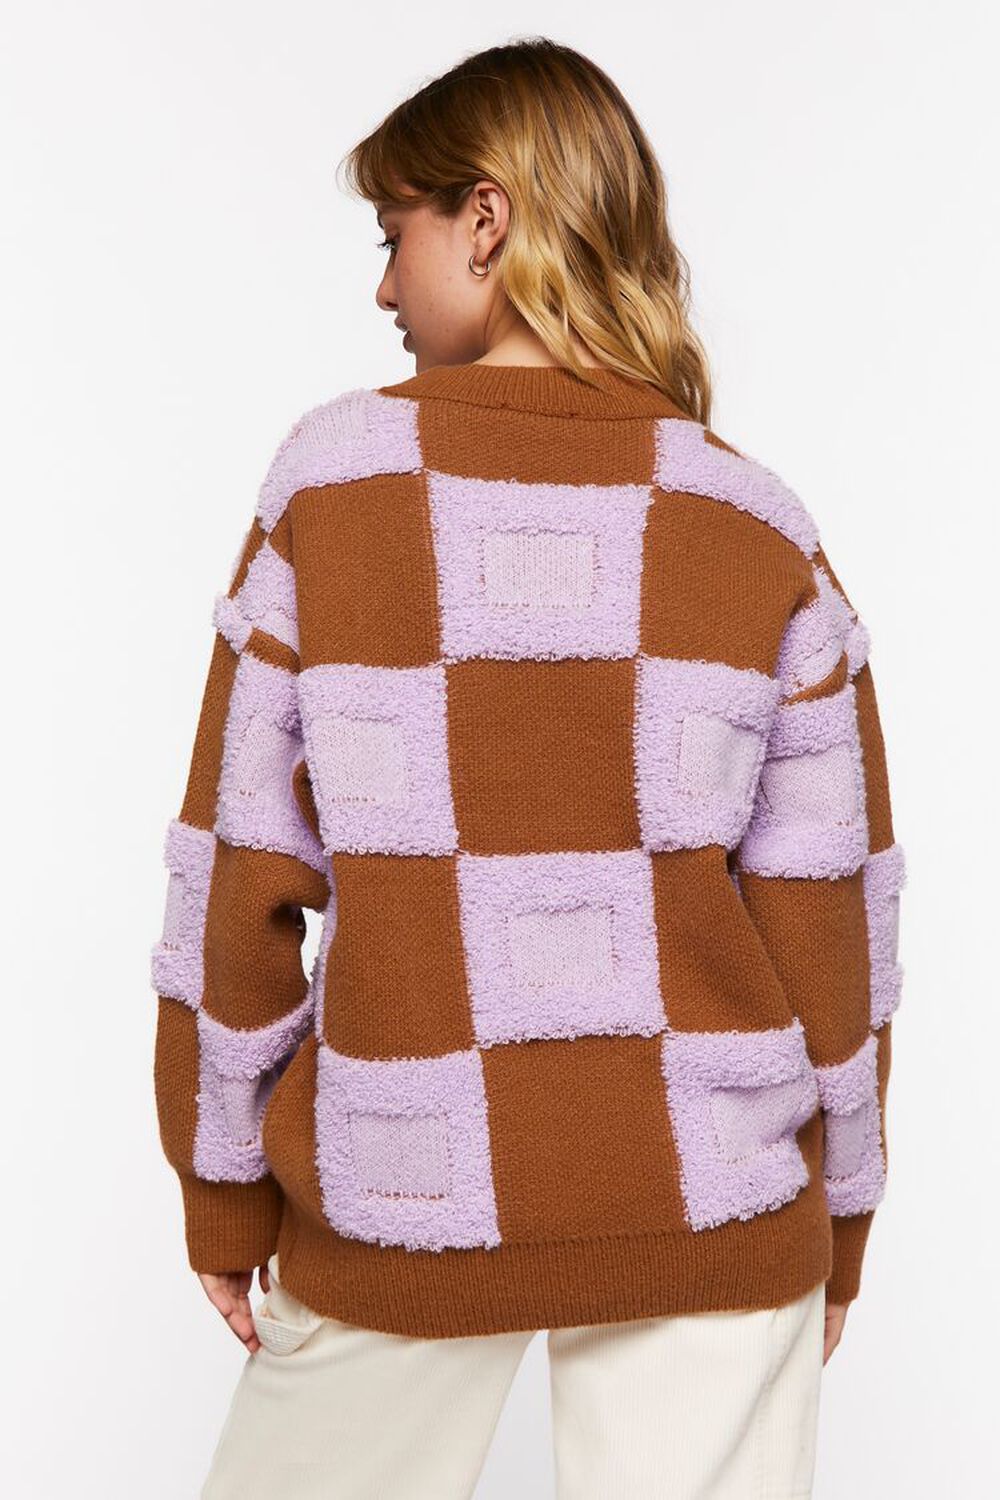 PURPLE/BROWN Fuzzy Checkered Sweater, image 3